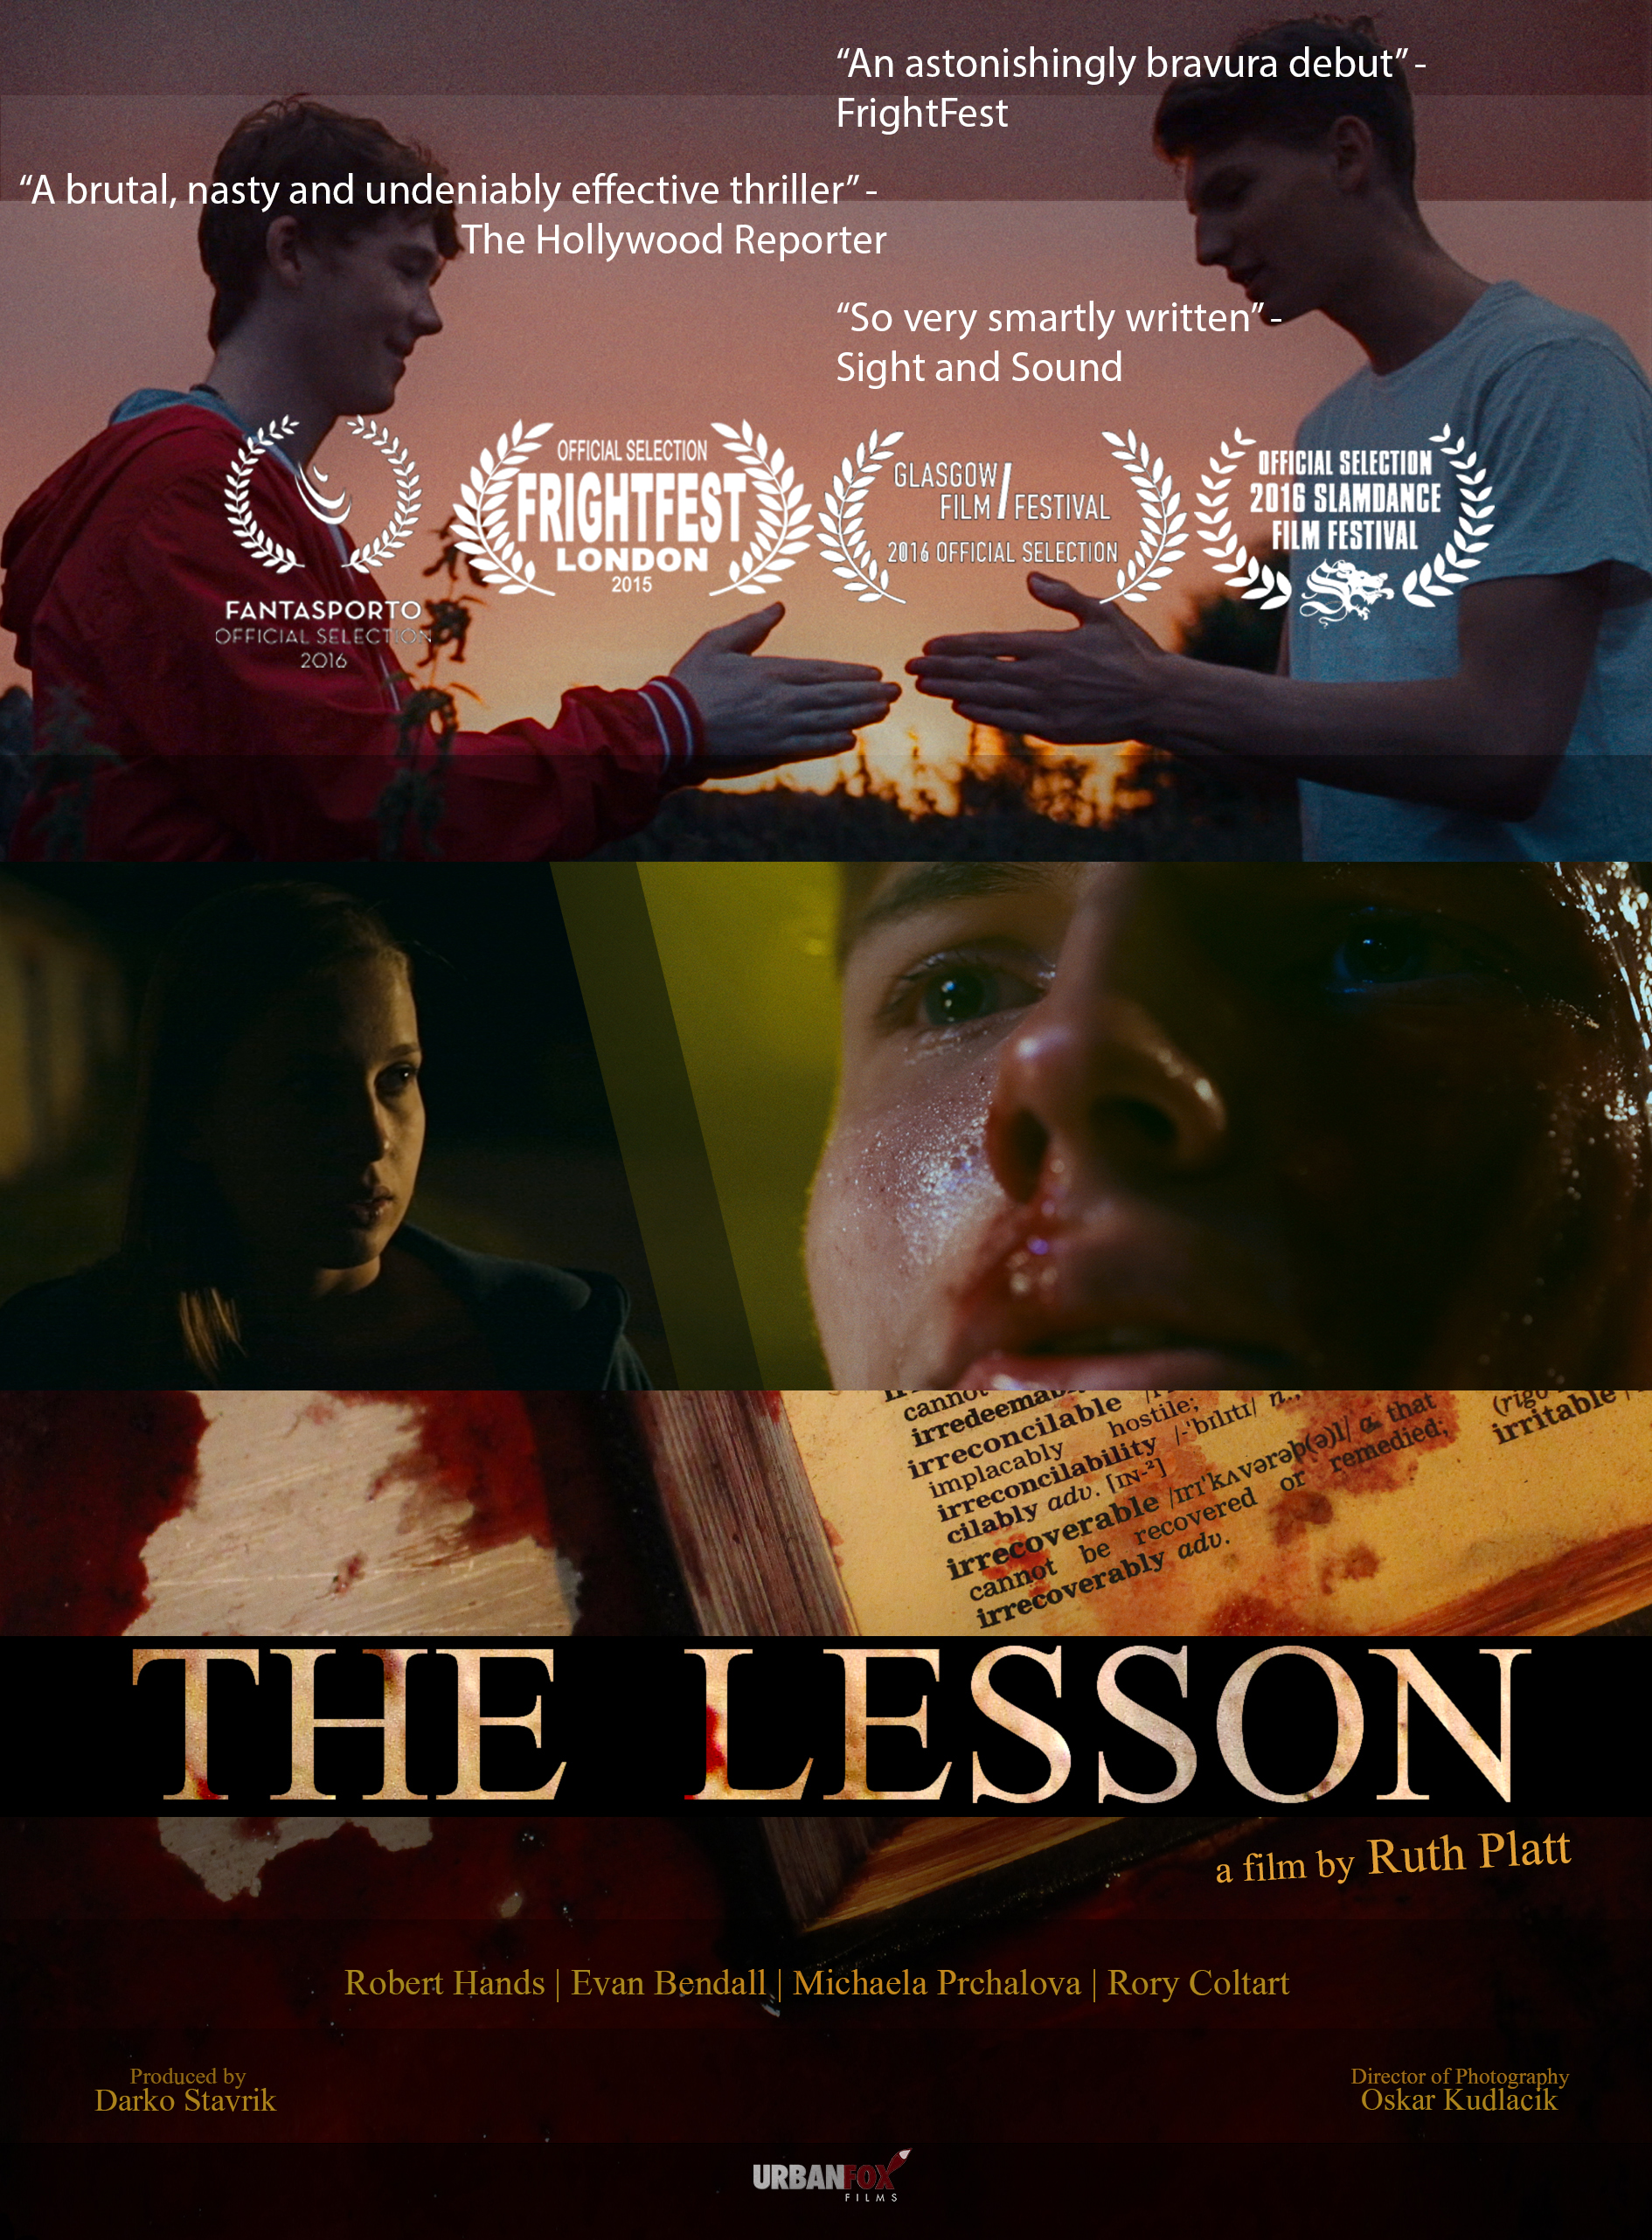 The Lesson New Poster-Final Laurels Quotes.jpg